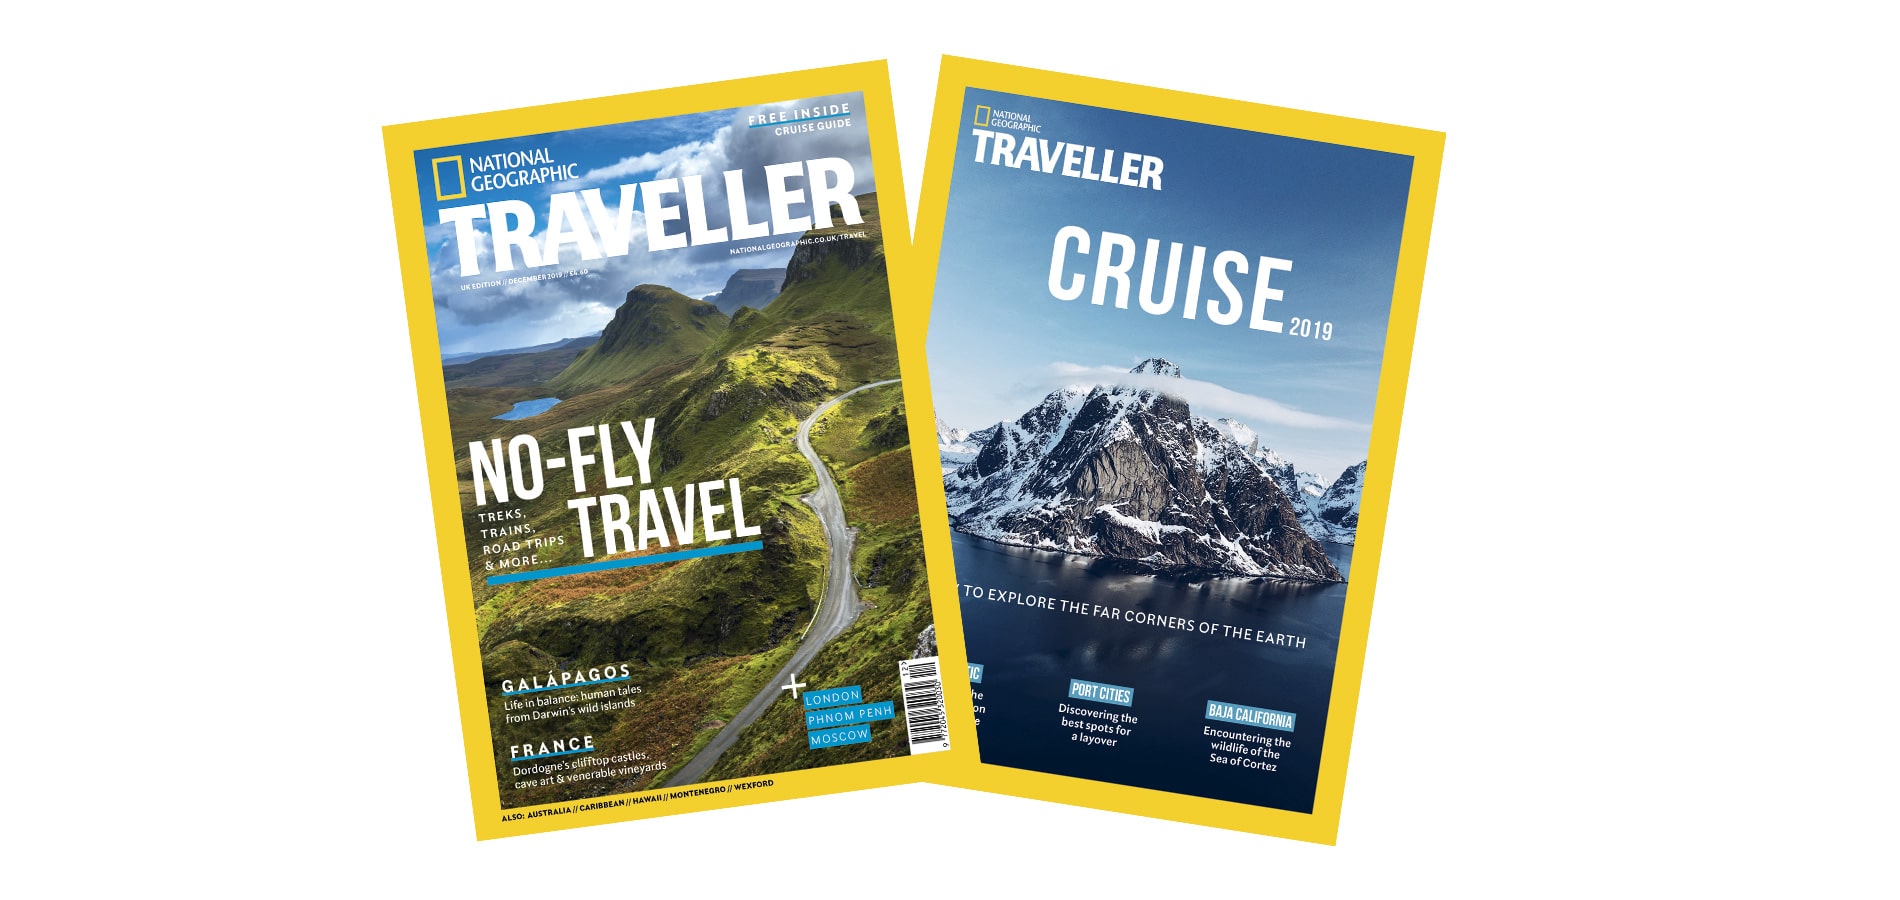 National Geographic Traveller (UK) December issue and Cruise guide covers.